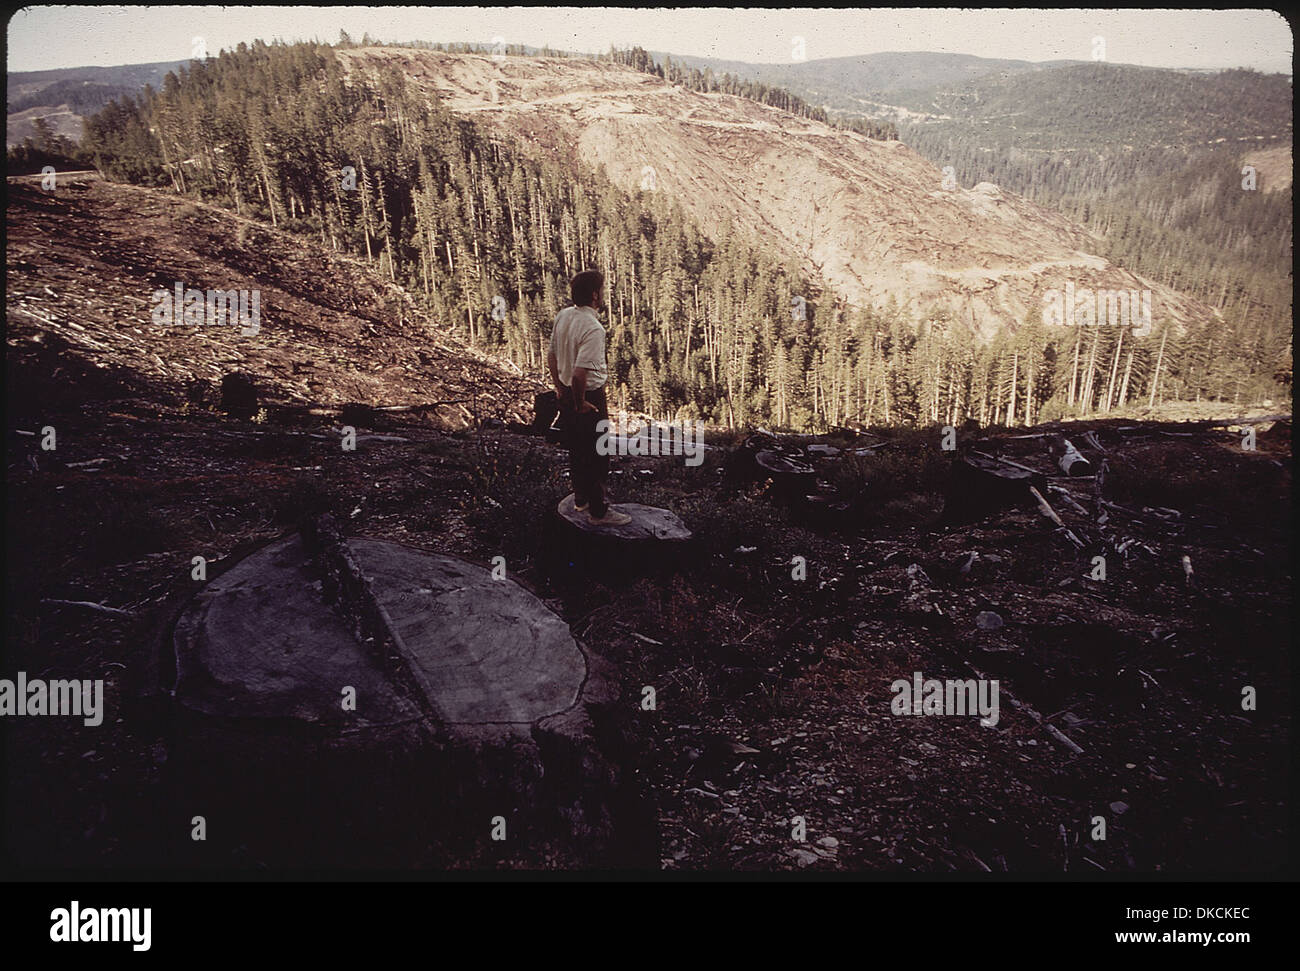 ONLY STUMPS REMAIN AFTER CLEAR-CUTTING OPERATIONS ON THESE SLOPES 542938 Stock Photo